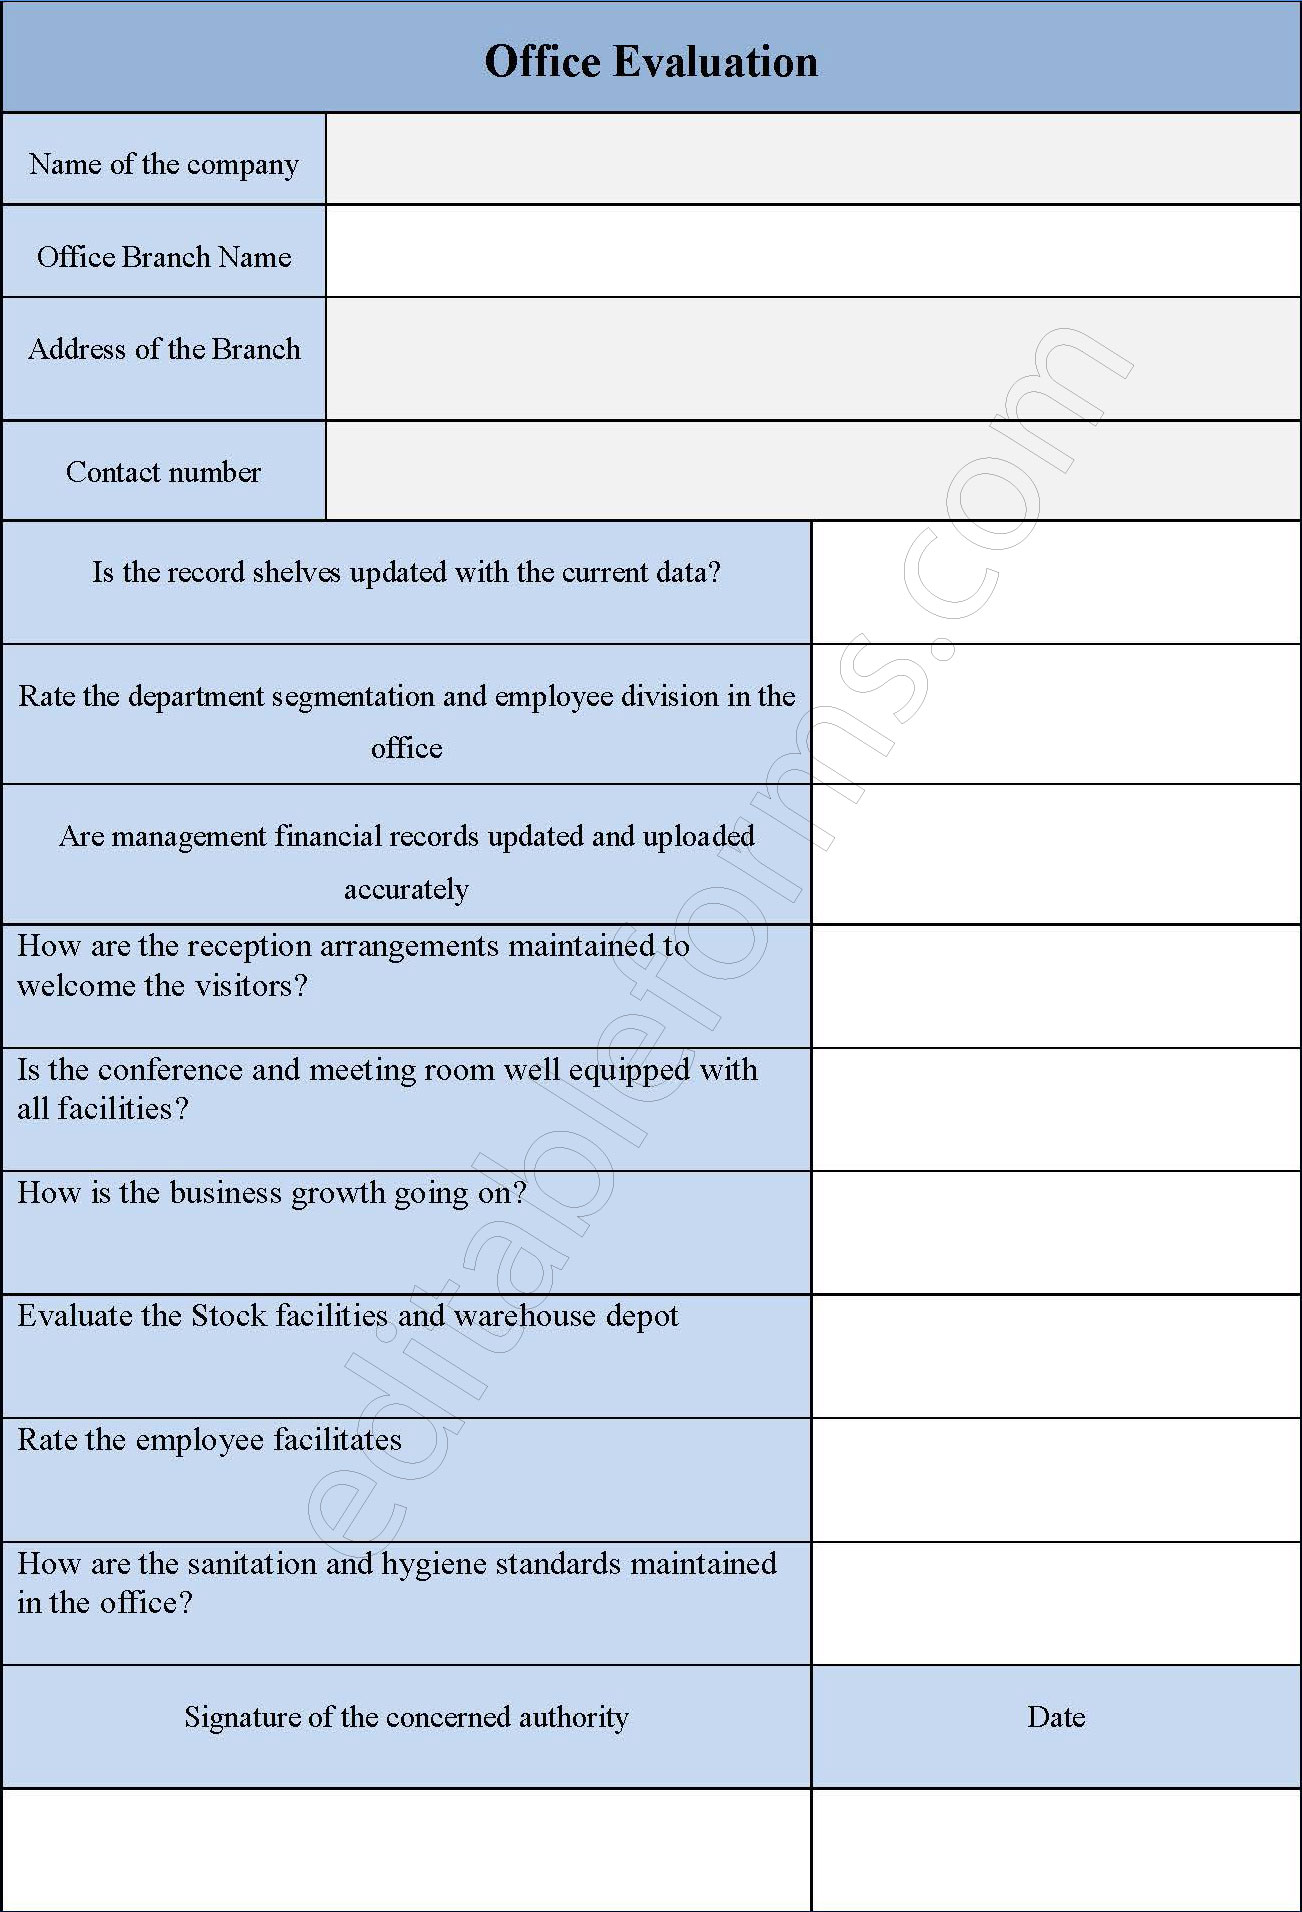 Office Evaluation Form